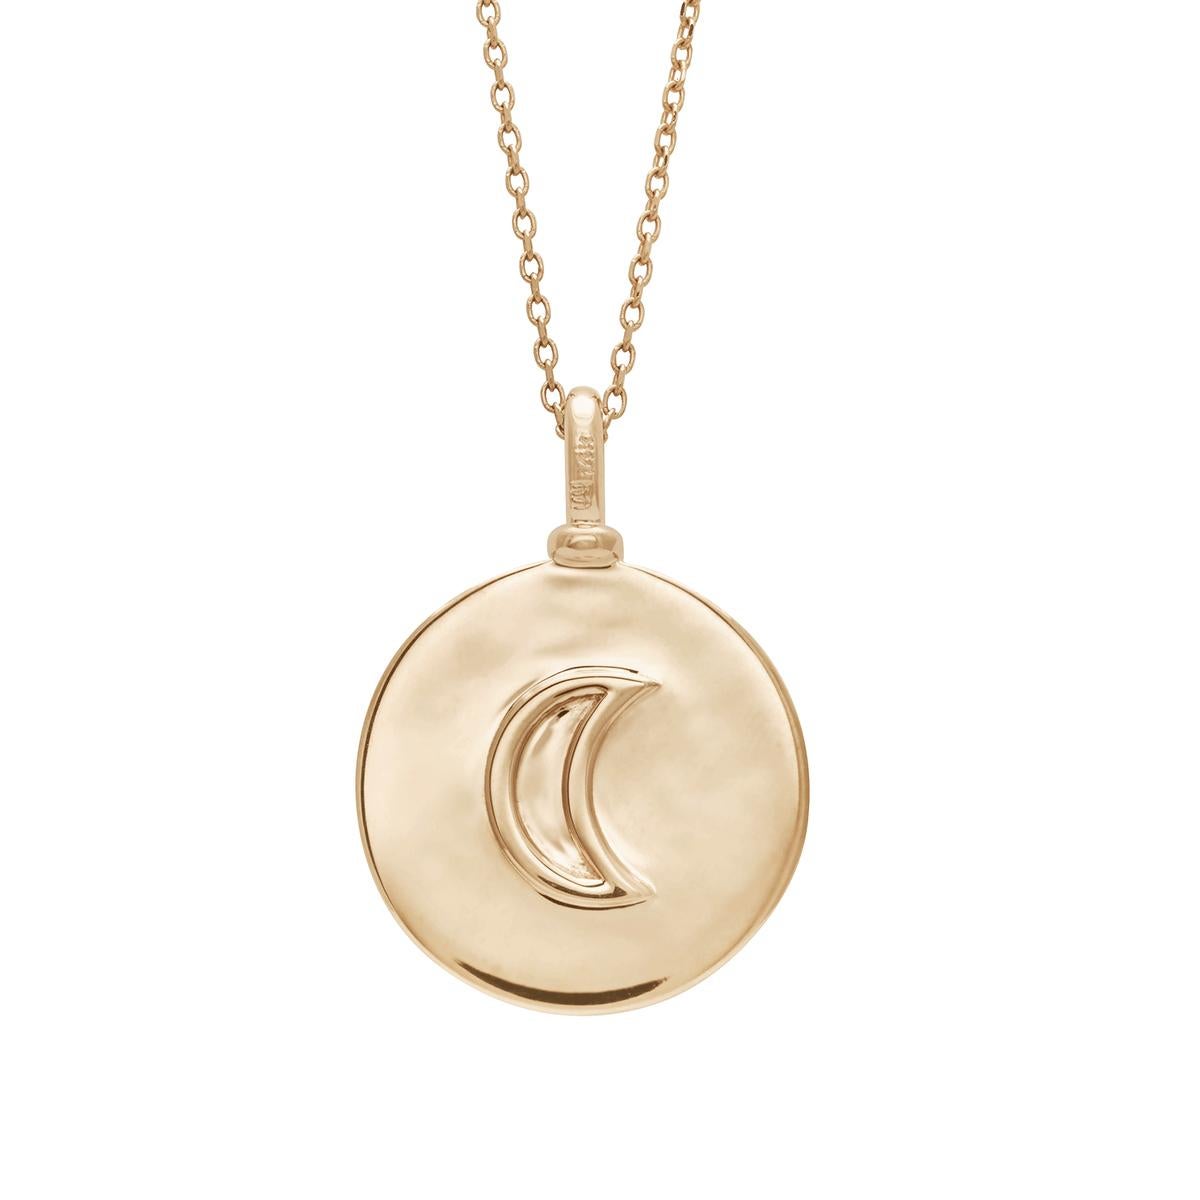 18mm, 14k yellow gold pendant with Cancer sign and 0.08 ctw white diamond (5 stones) constellation. The back of the pendant holds Cancer's ruling planet, Moon. 16